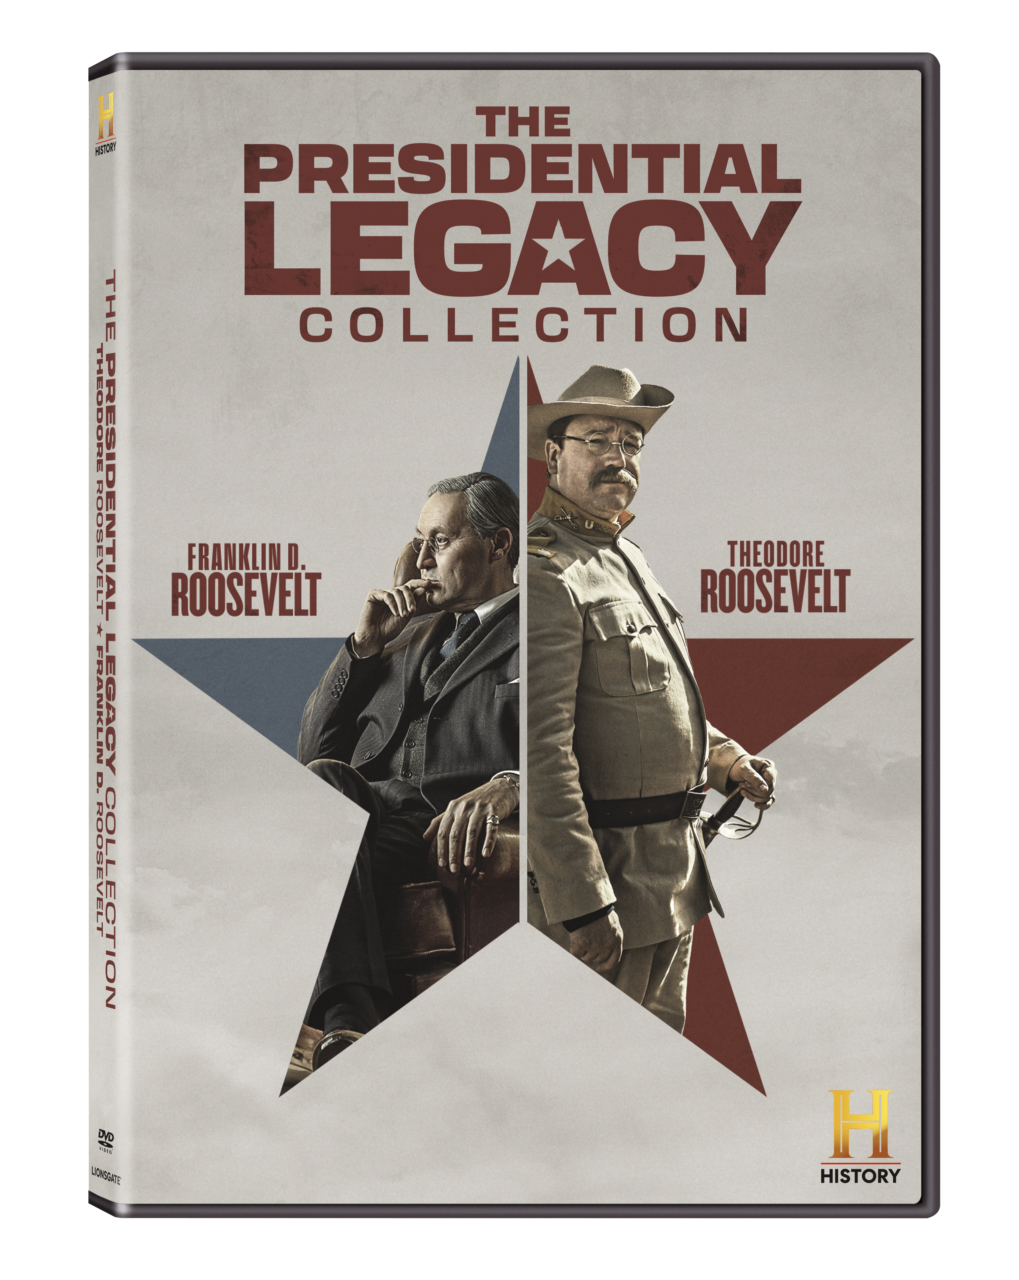 The Presidential Legacy Collection: Theodore Roosevelt & FDR DVD cover (HISTORY/Lionsgate)